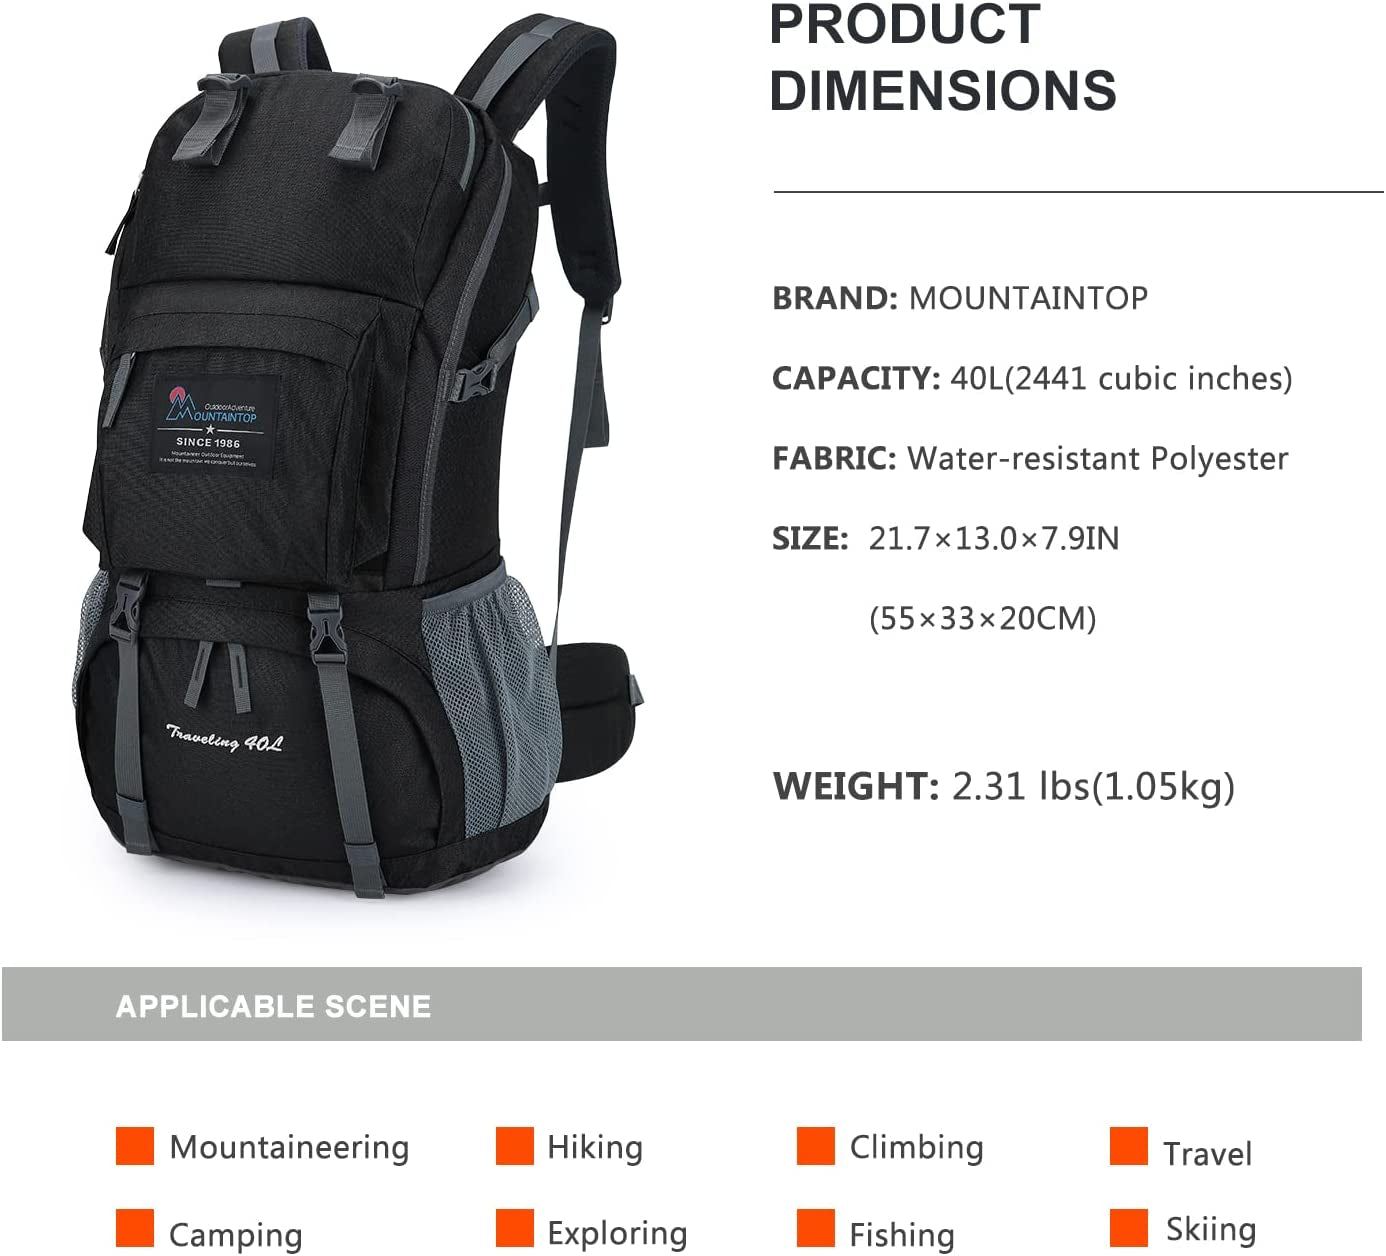 "Premium 40L Hiking Backpack with Rain Cover - Ideal for Outdoor Adventures!"